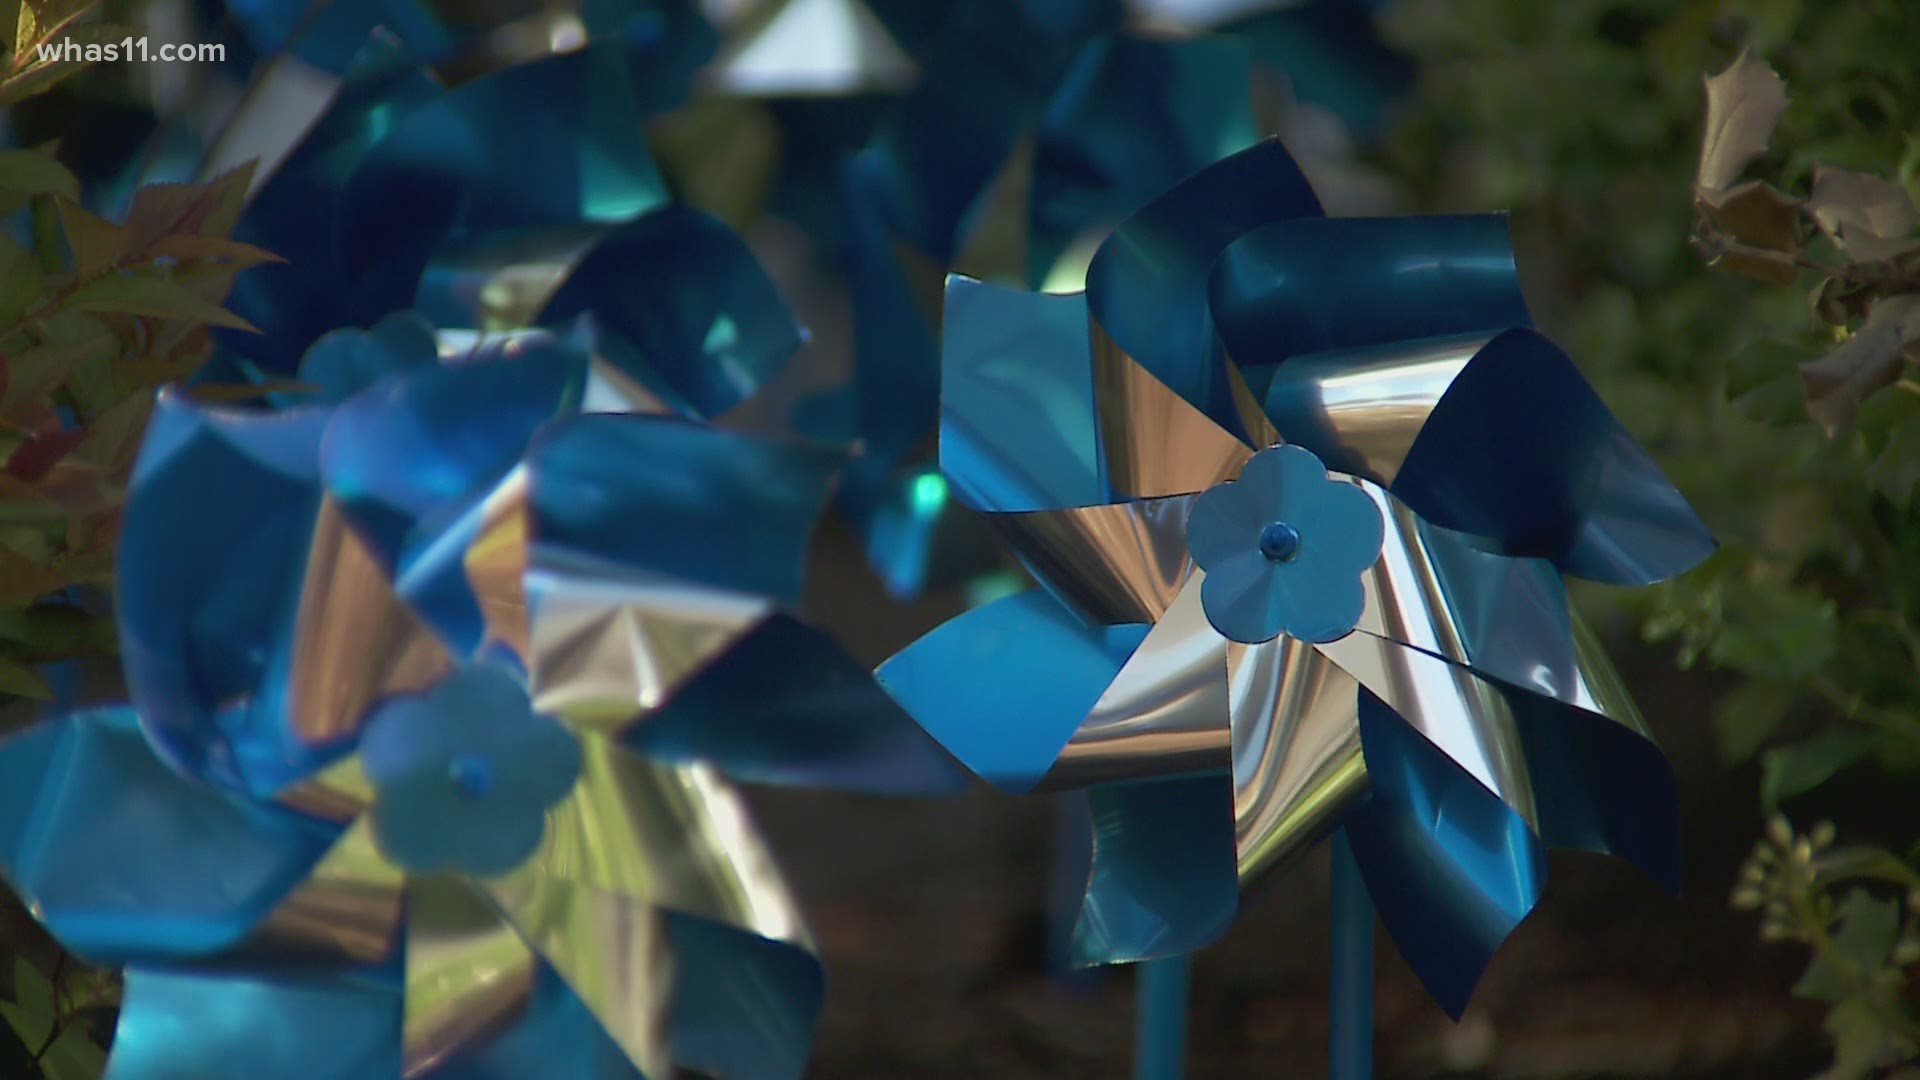 Dr. Jenny Green said the pinwheels represent a child's joy and innocence. This month the hospital plans to educate the public on child abuse warning signs.